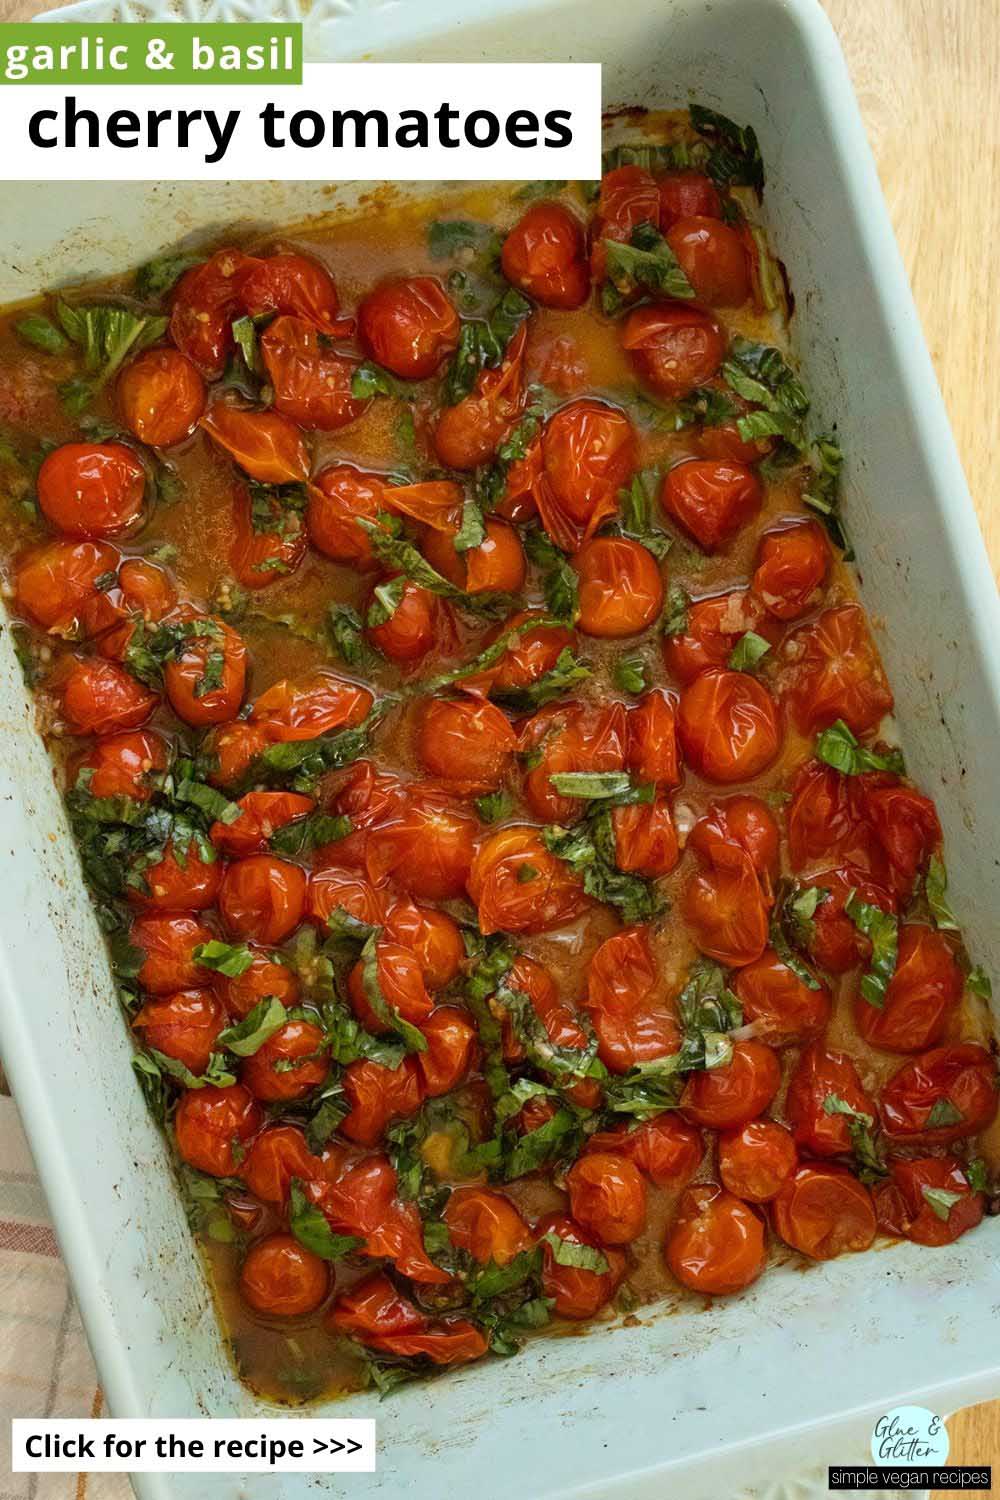 oven roasted cherry tomatoes in the baking pan, after baking, text overlay